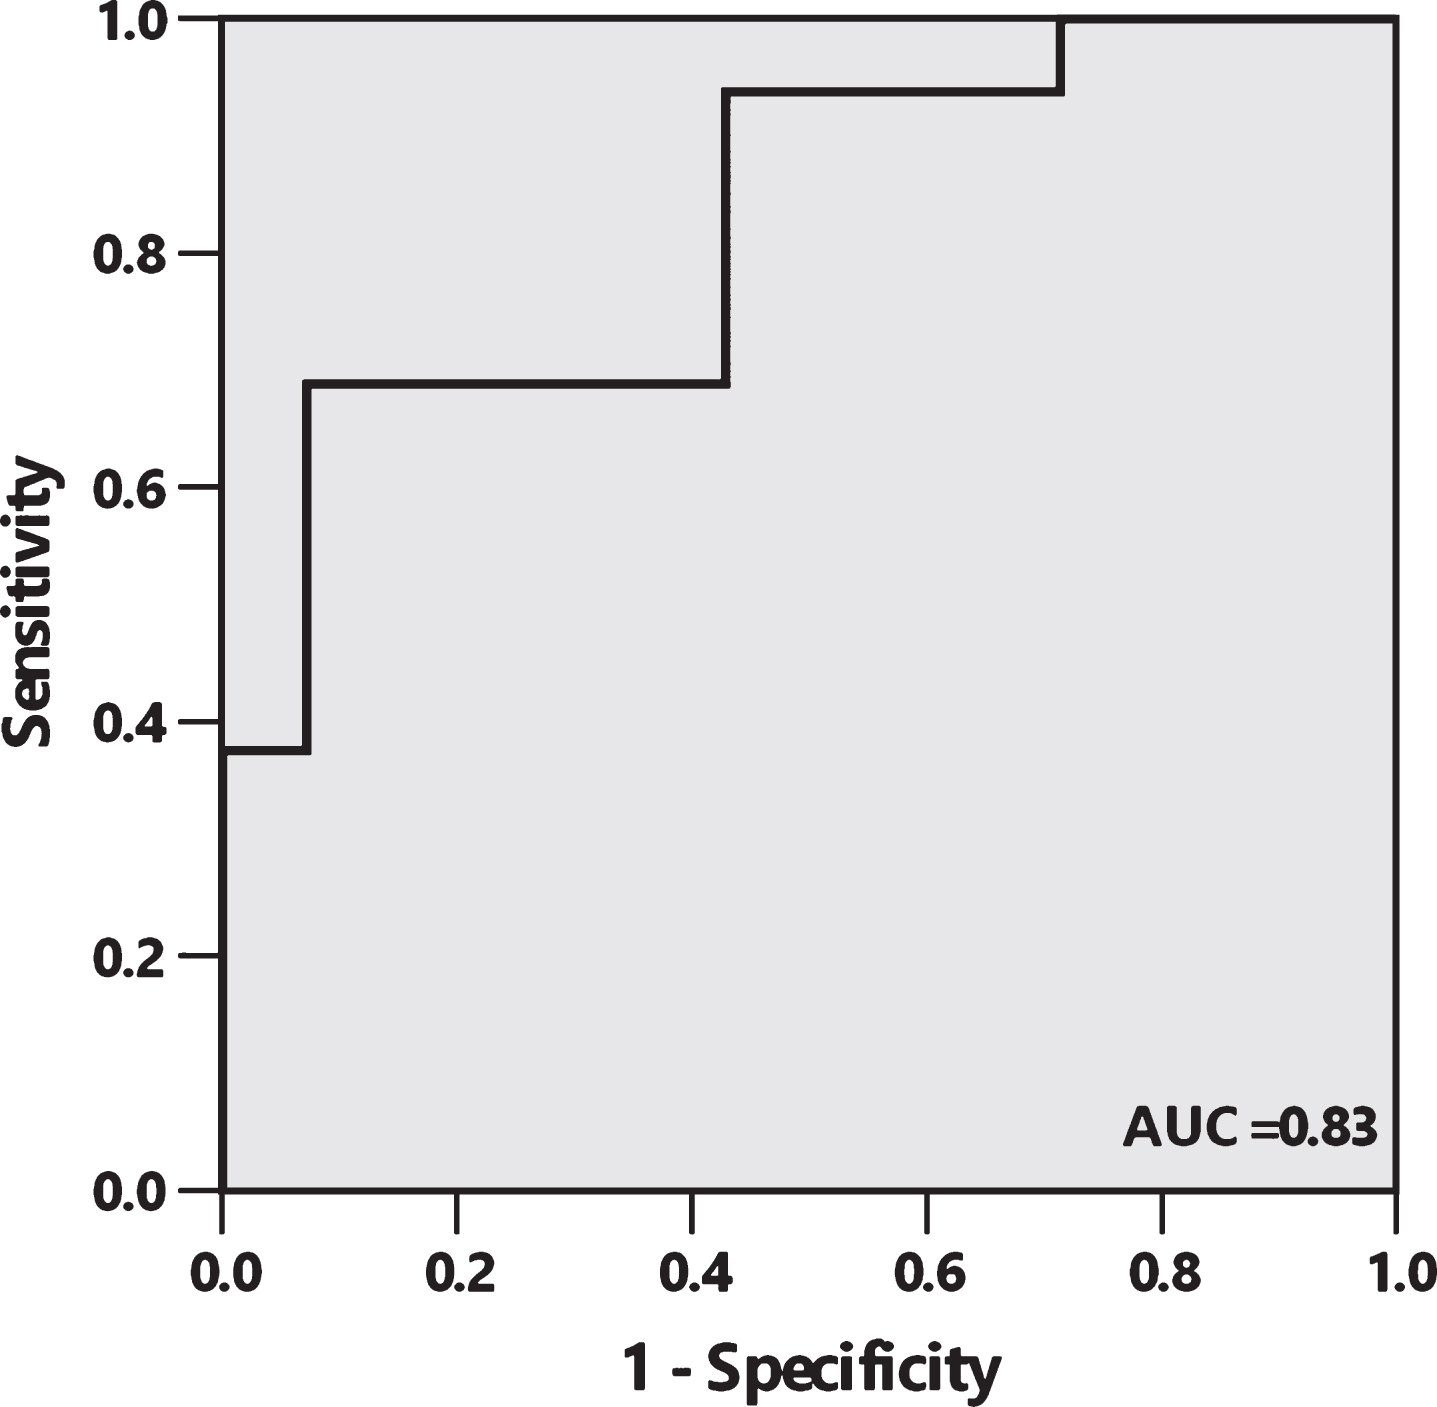 Receiver operating characteristic (ROC) curve depicts sensitivity and 1 minus specificity level of urine AD7c-NTP for discrimination between PiB positive and PiB negative patients with AD or MCI. The area under the curve (AUC) is 0.83 (95% CI 0.68 to 0.97), with sensitivity, specificity, PPV, and NPV of 68.8% (95% CI 41.5–87.9), 92.9% (95% CI 64.2–99.6), 91.7% (95% CI 59.8–99.6), and 72.2% (95% CI 46.4–89.3), respectively, at a cutoff of 1.46 ng/ml.